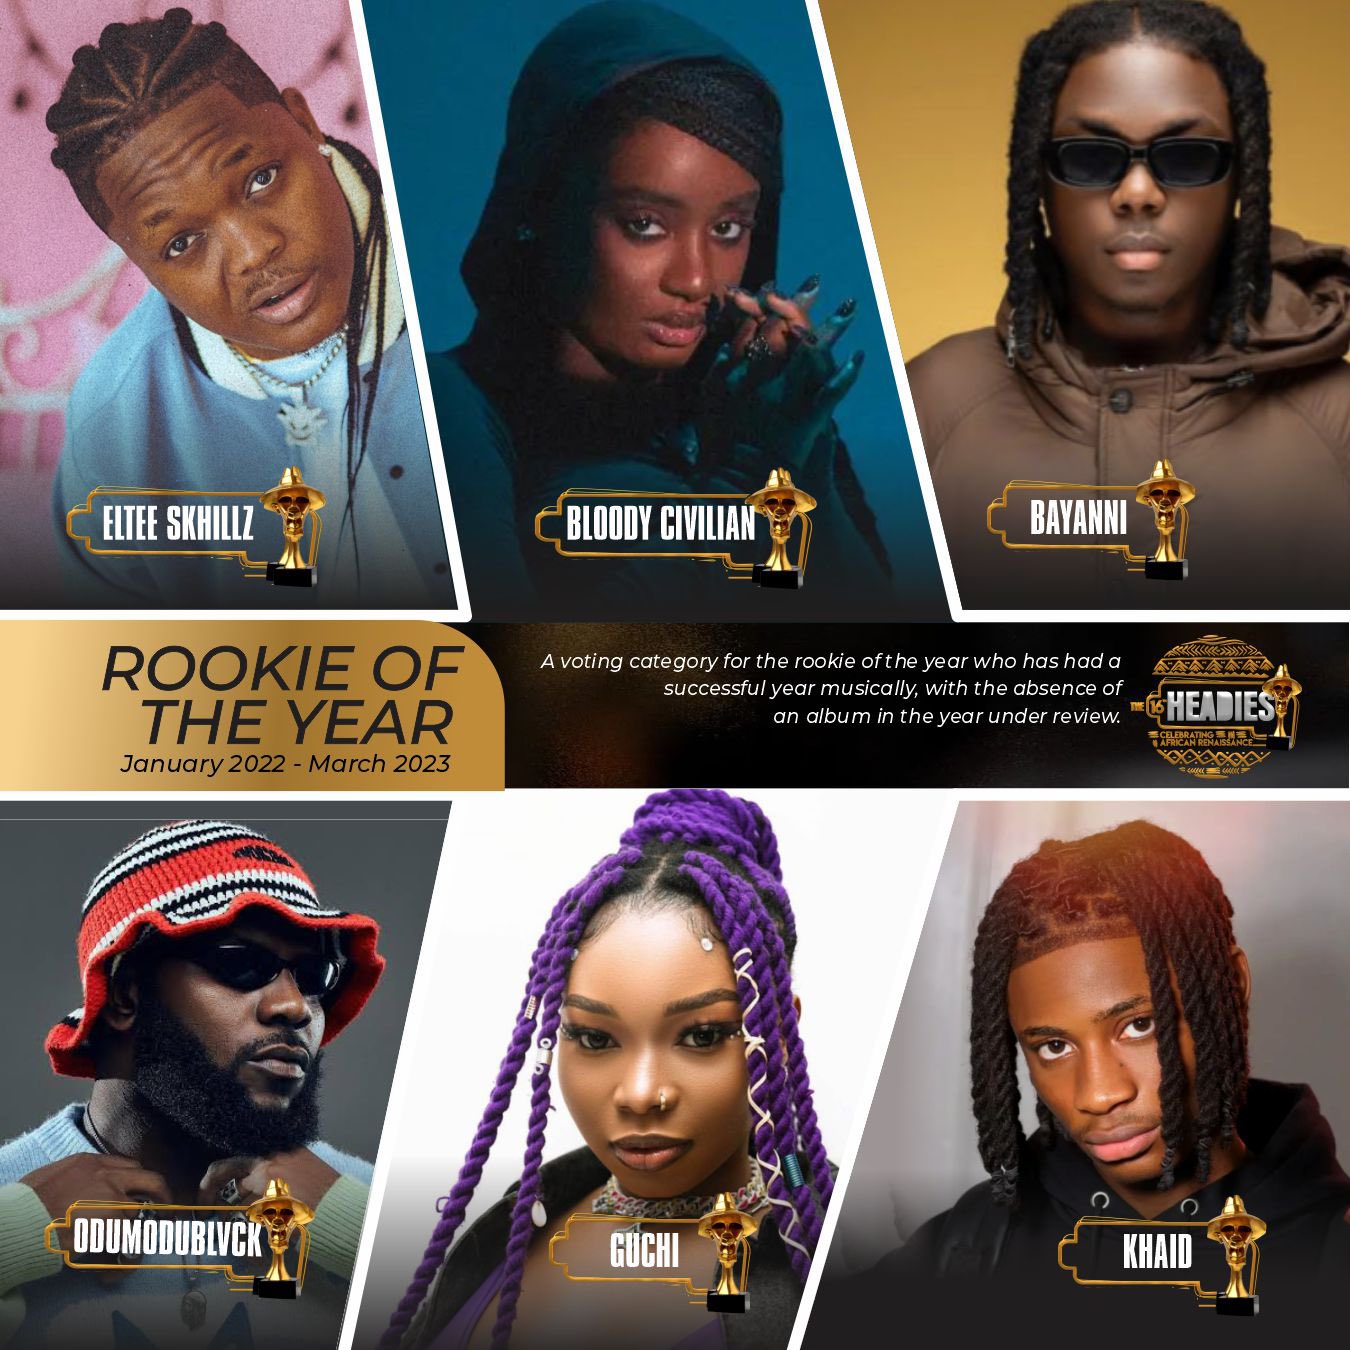 Headies Disqualifies Portable Over Threat To Life Of Co-Nominees